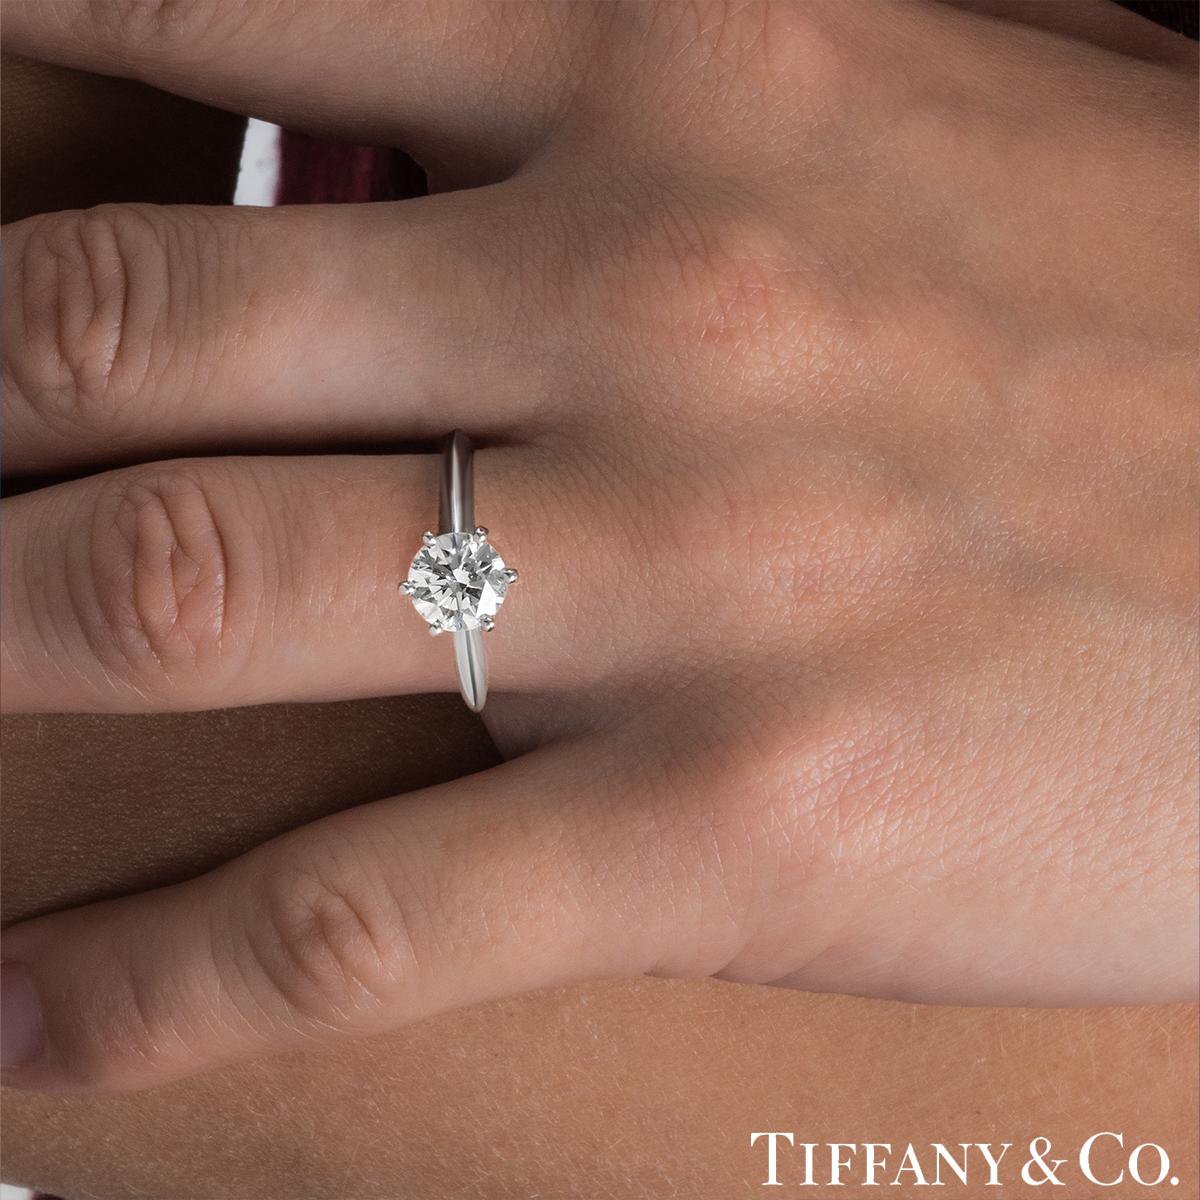 Tiffany & Co. Platinum Diamond Setting Solitaire Engagement Ring 1.08ct I/VS1  In Excellent Condition For Sale In London, GB